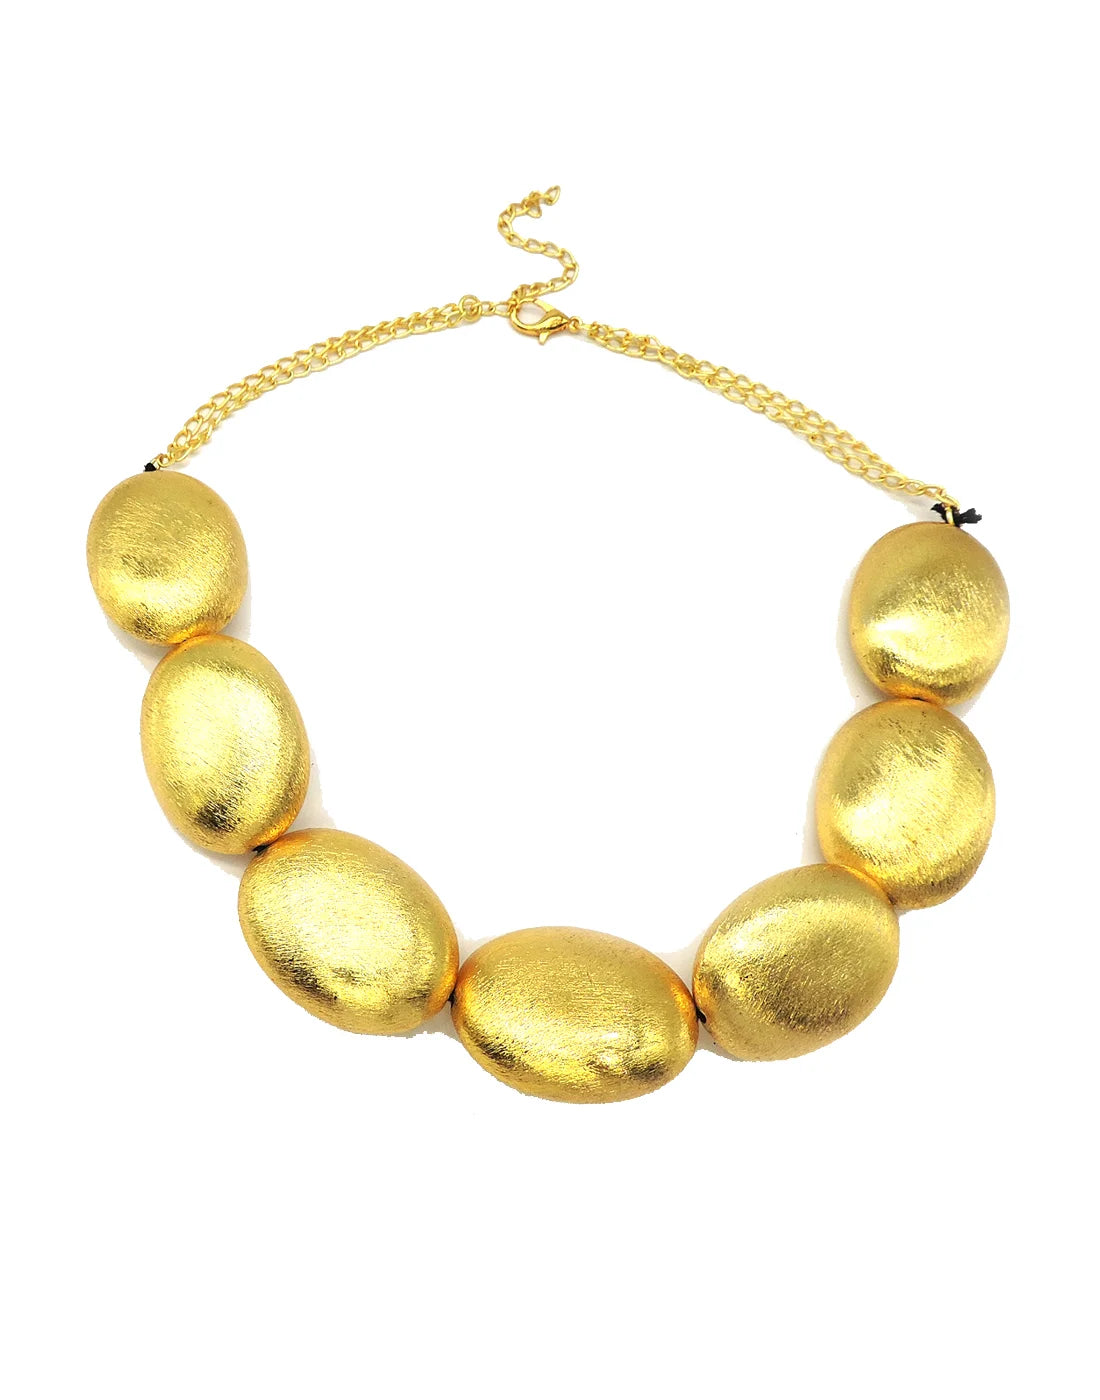 Oval Gold Necklace- Handcrafted Jewellery from Dori